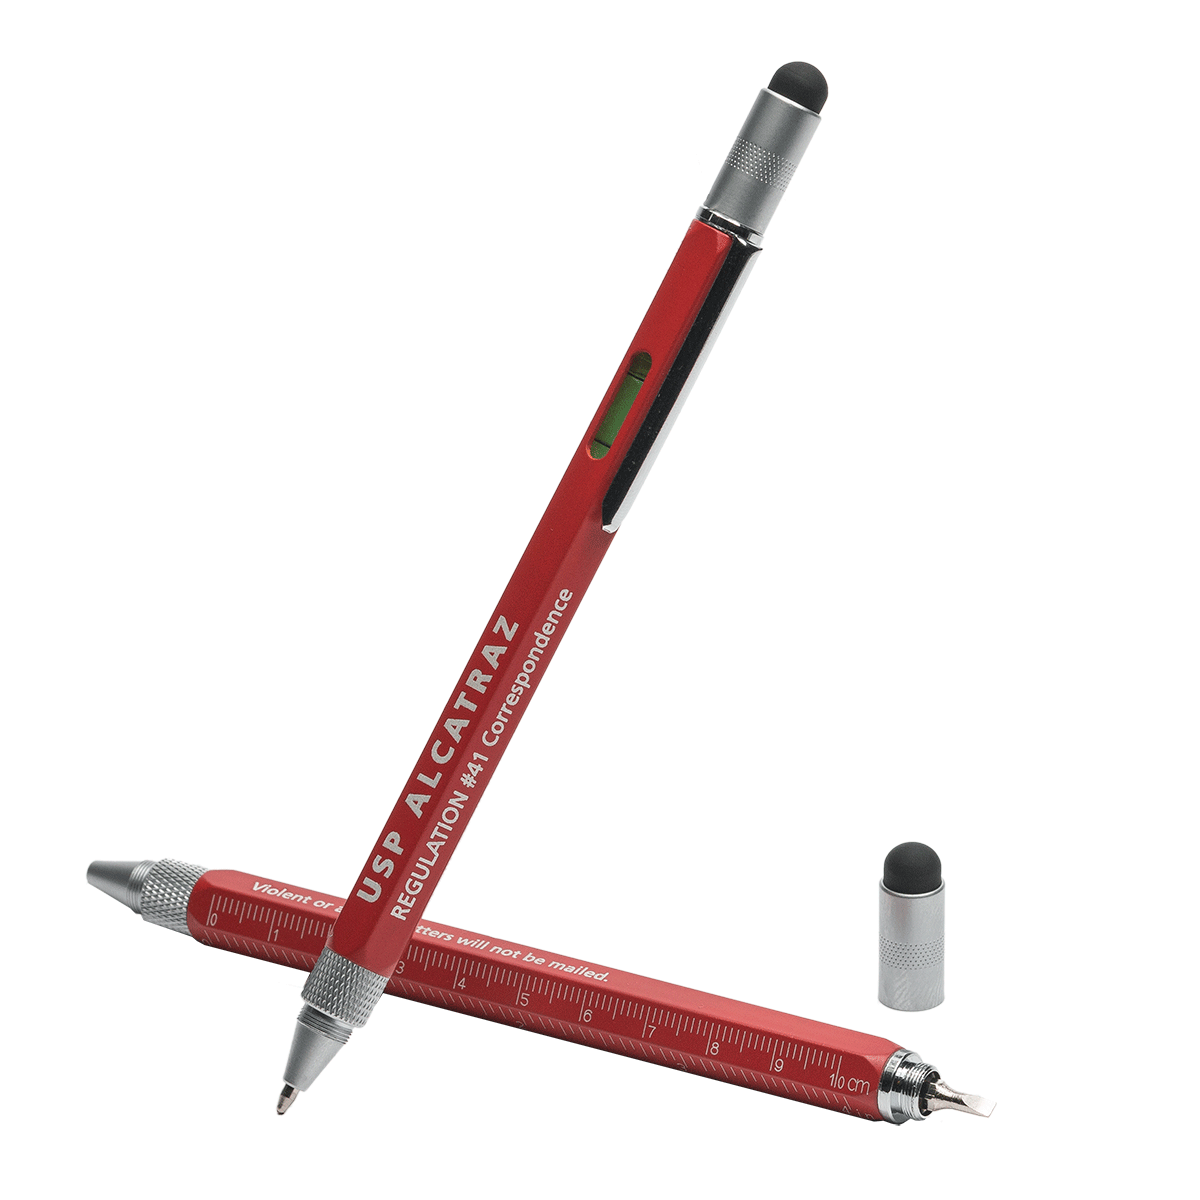 Orange Alcatraz Regulation 41 utility pen with tablet stylus, level, Phillips and flathead screwdrivers, US and metric ruler.